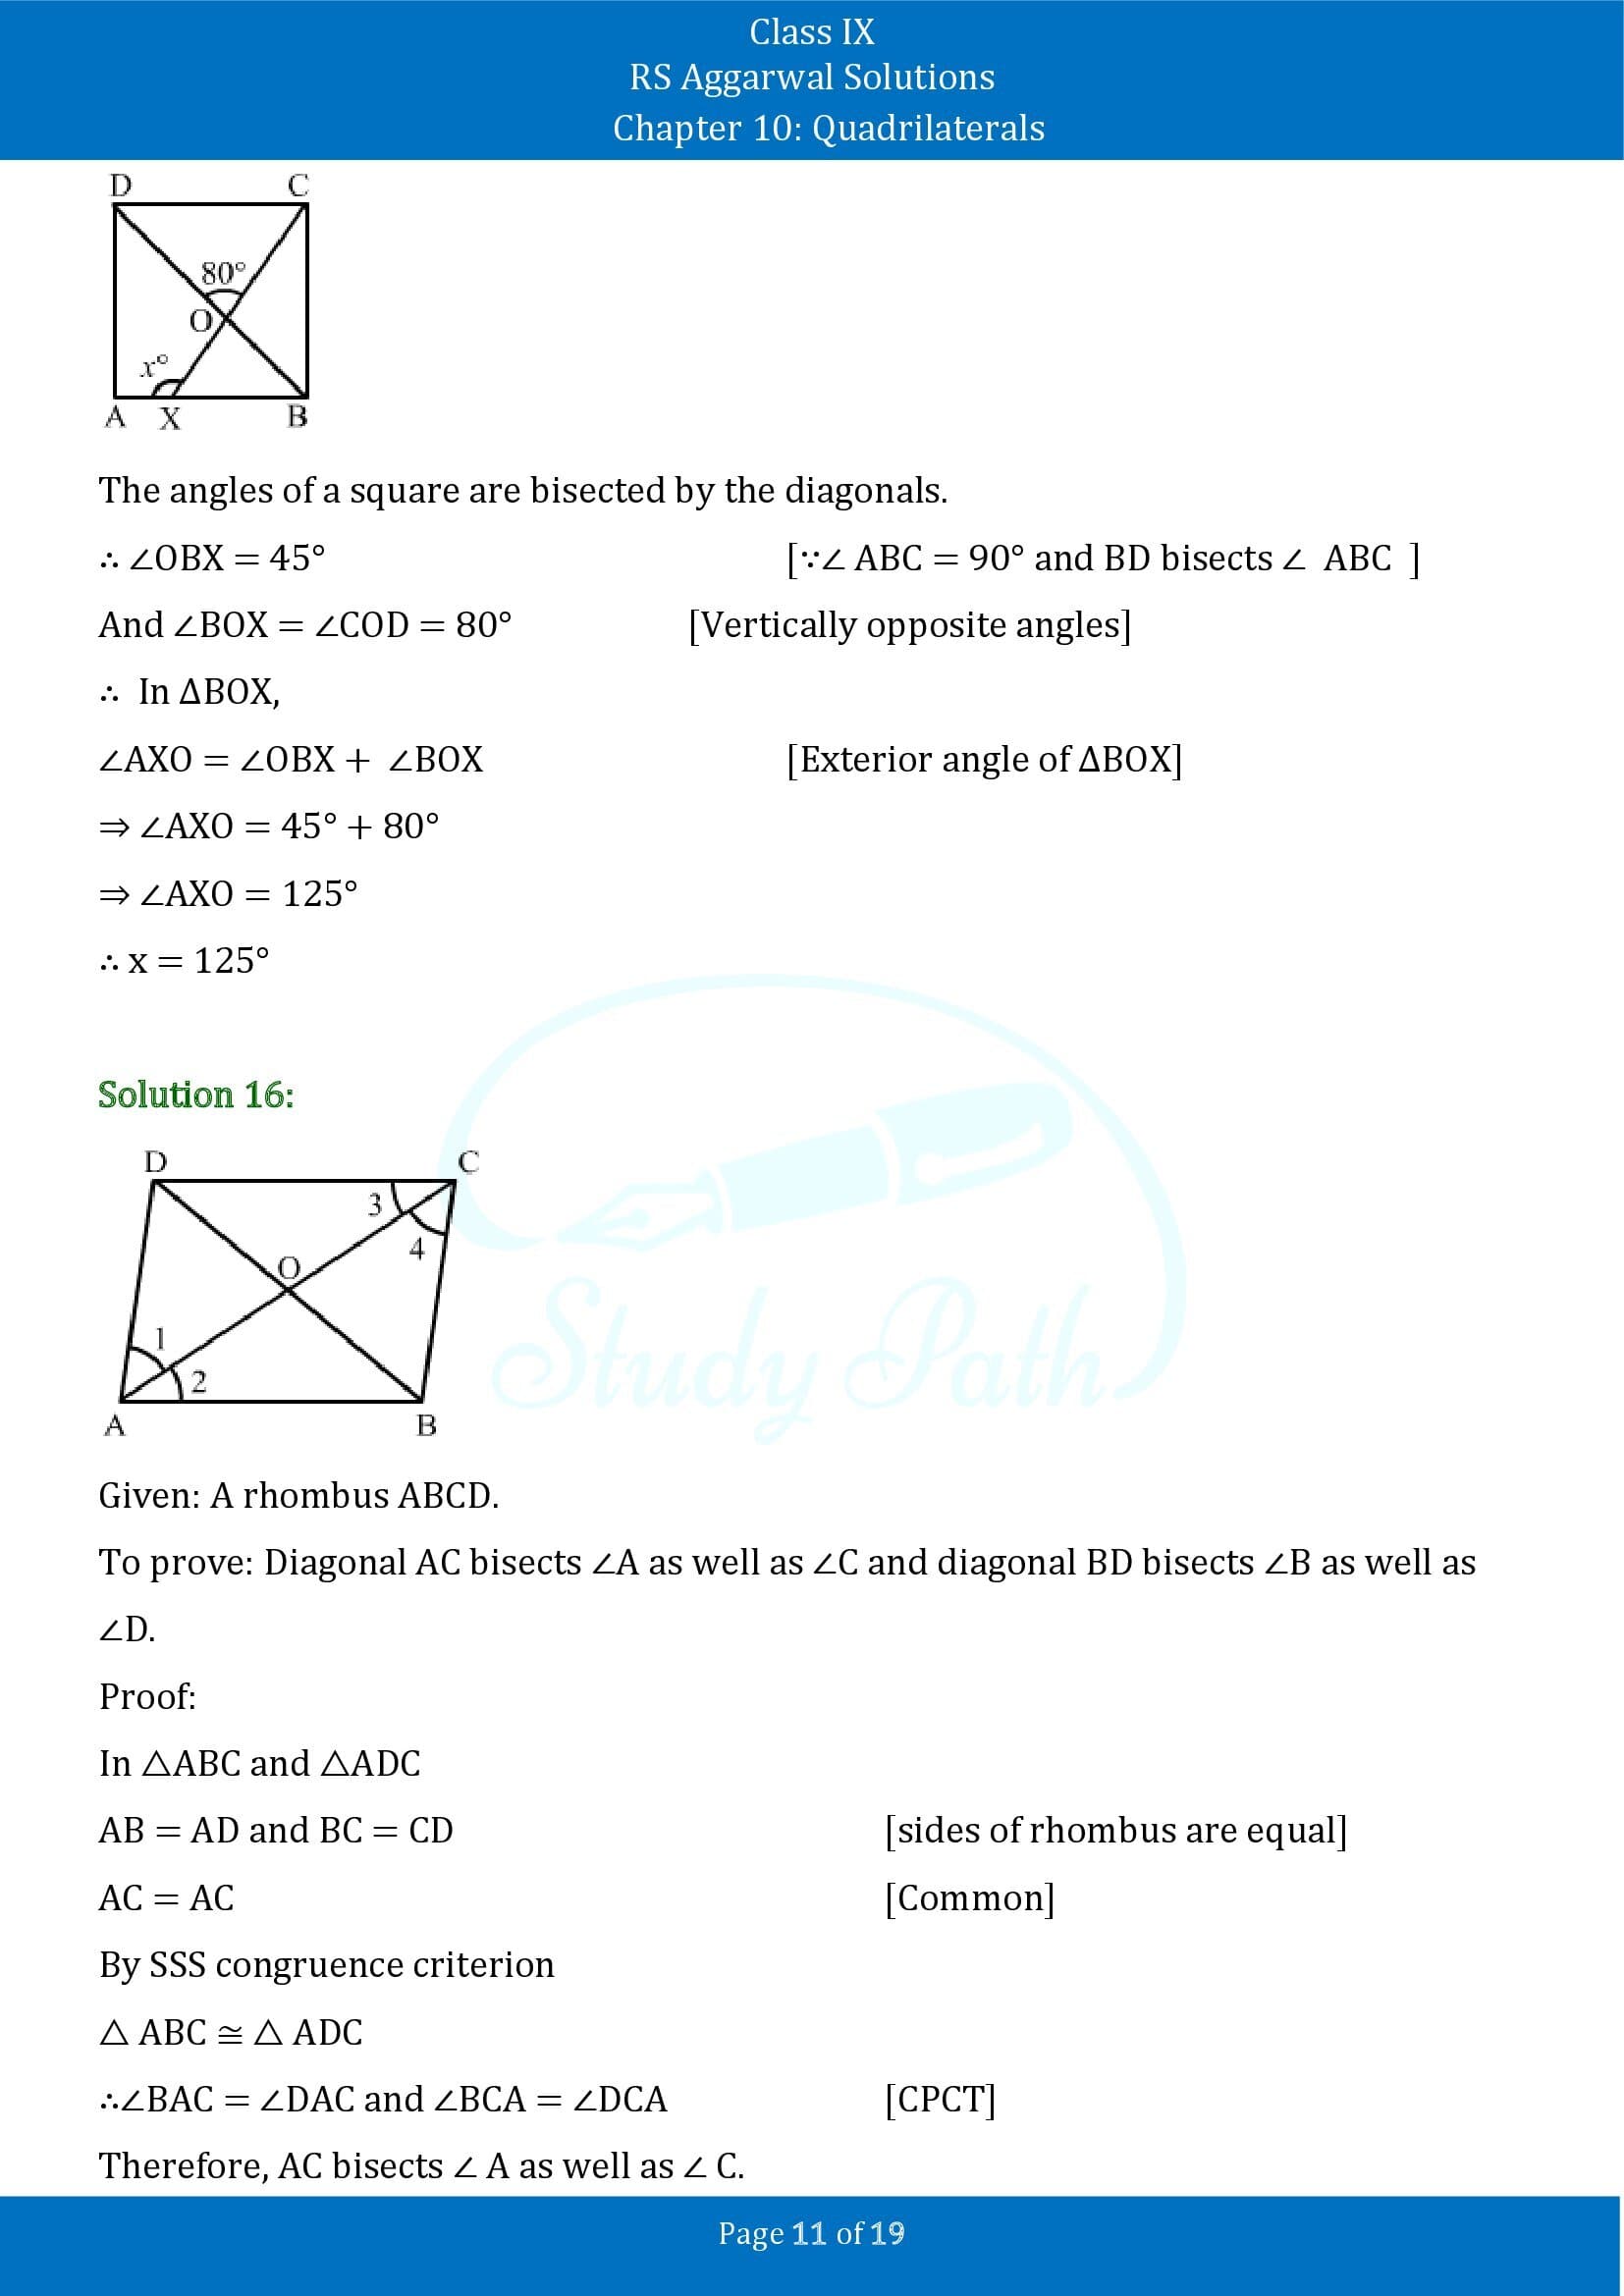 RS Aggarwal Solutions Class 9 Chapter 10 Quadrilaterals Exercise 10B 00011